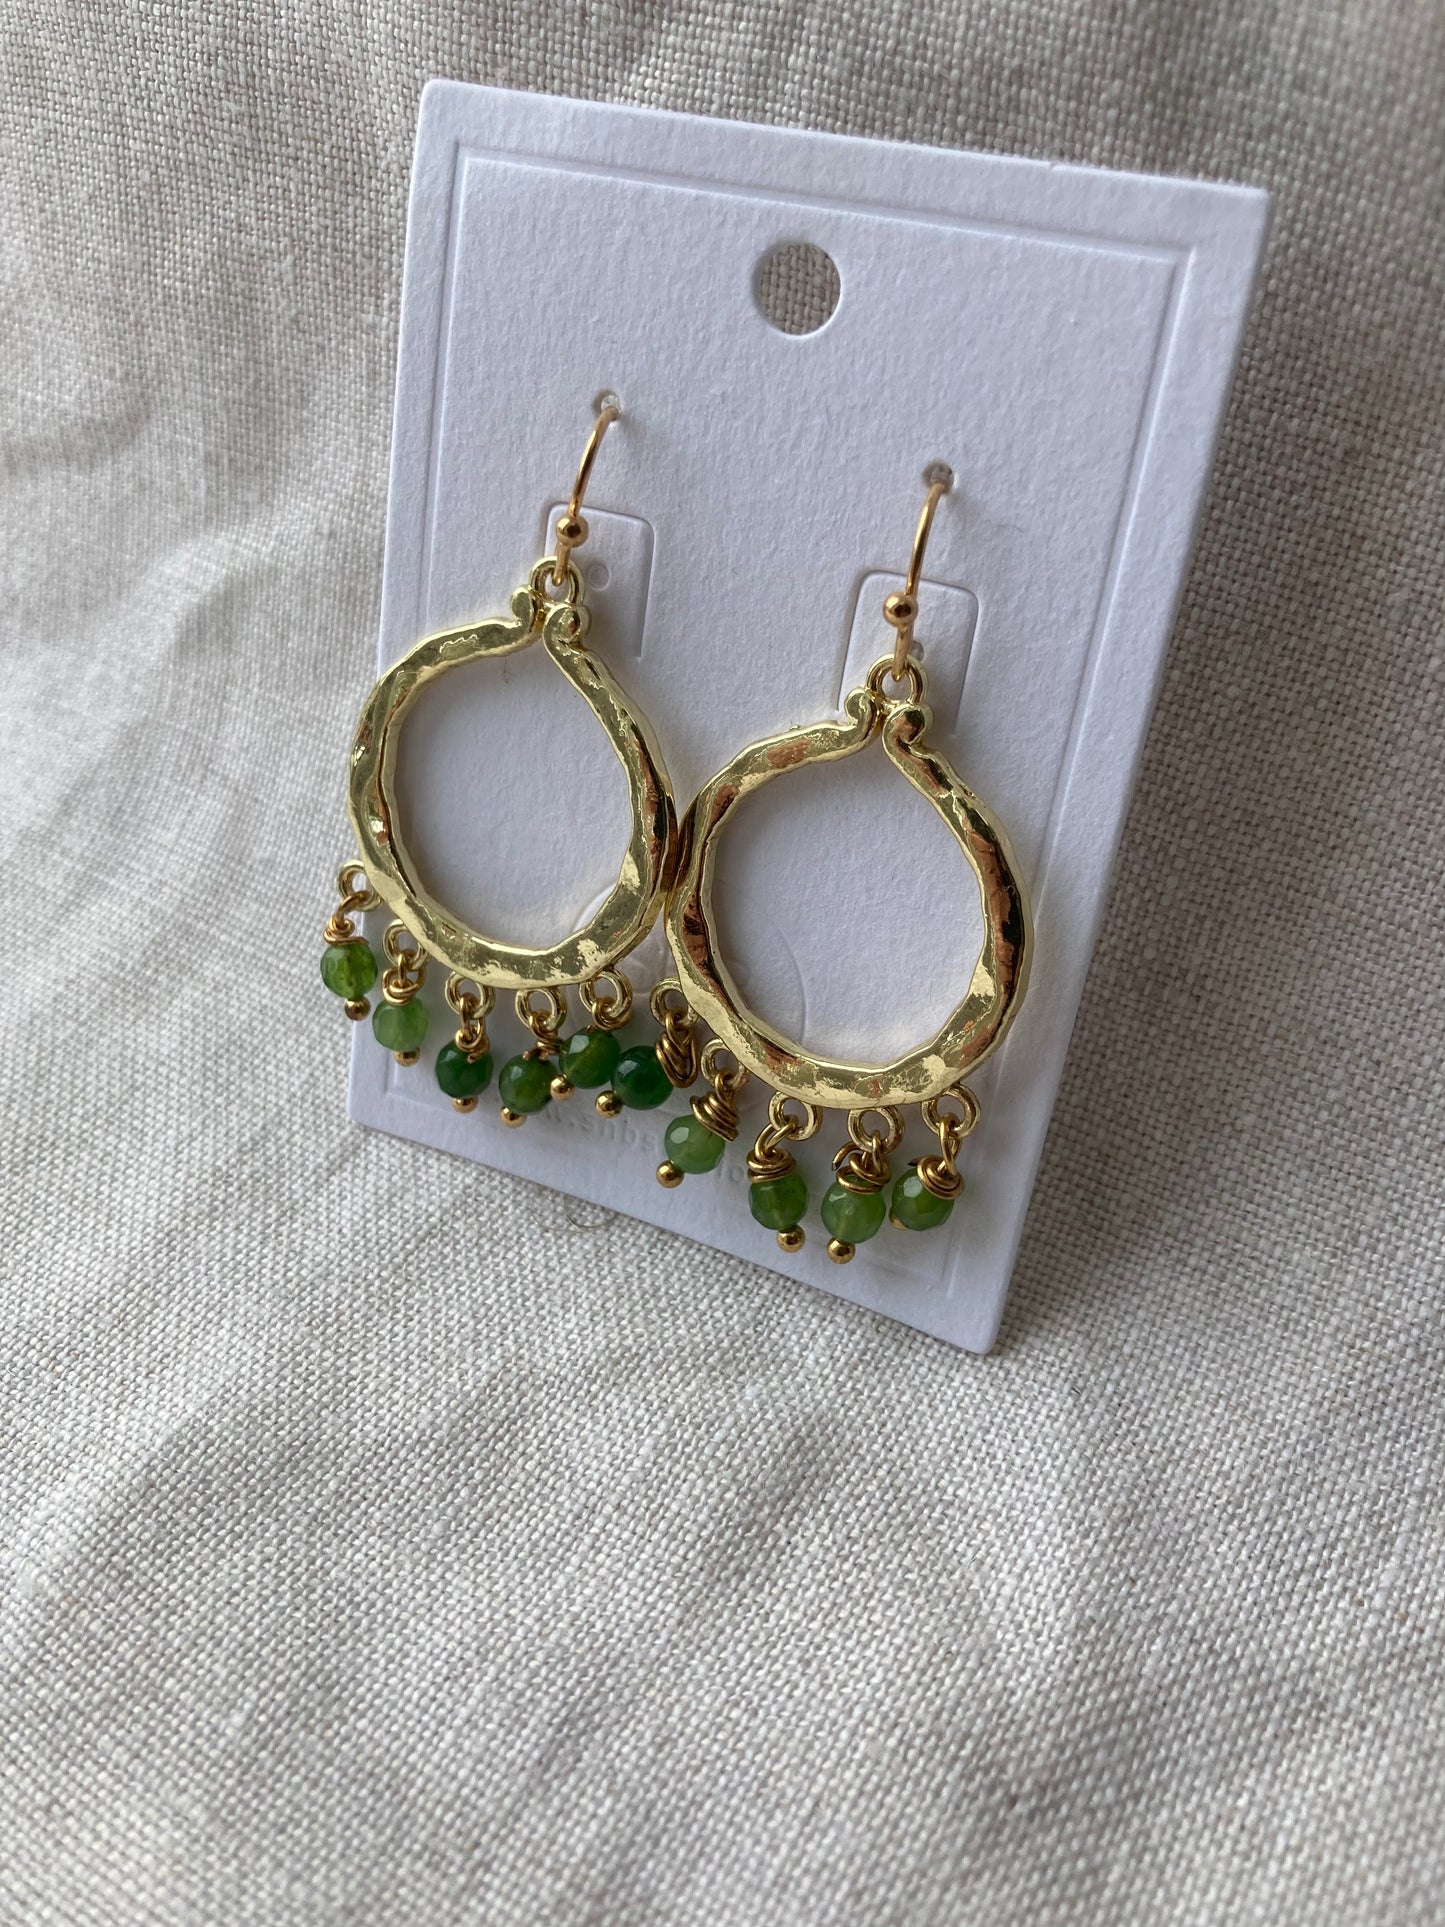 Gold tone Open Round Hook Earring - Green Beads